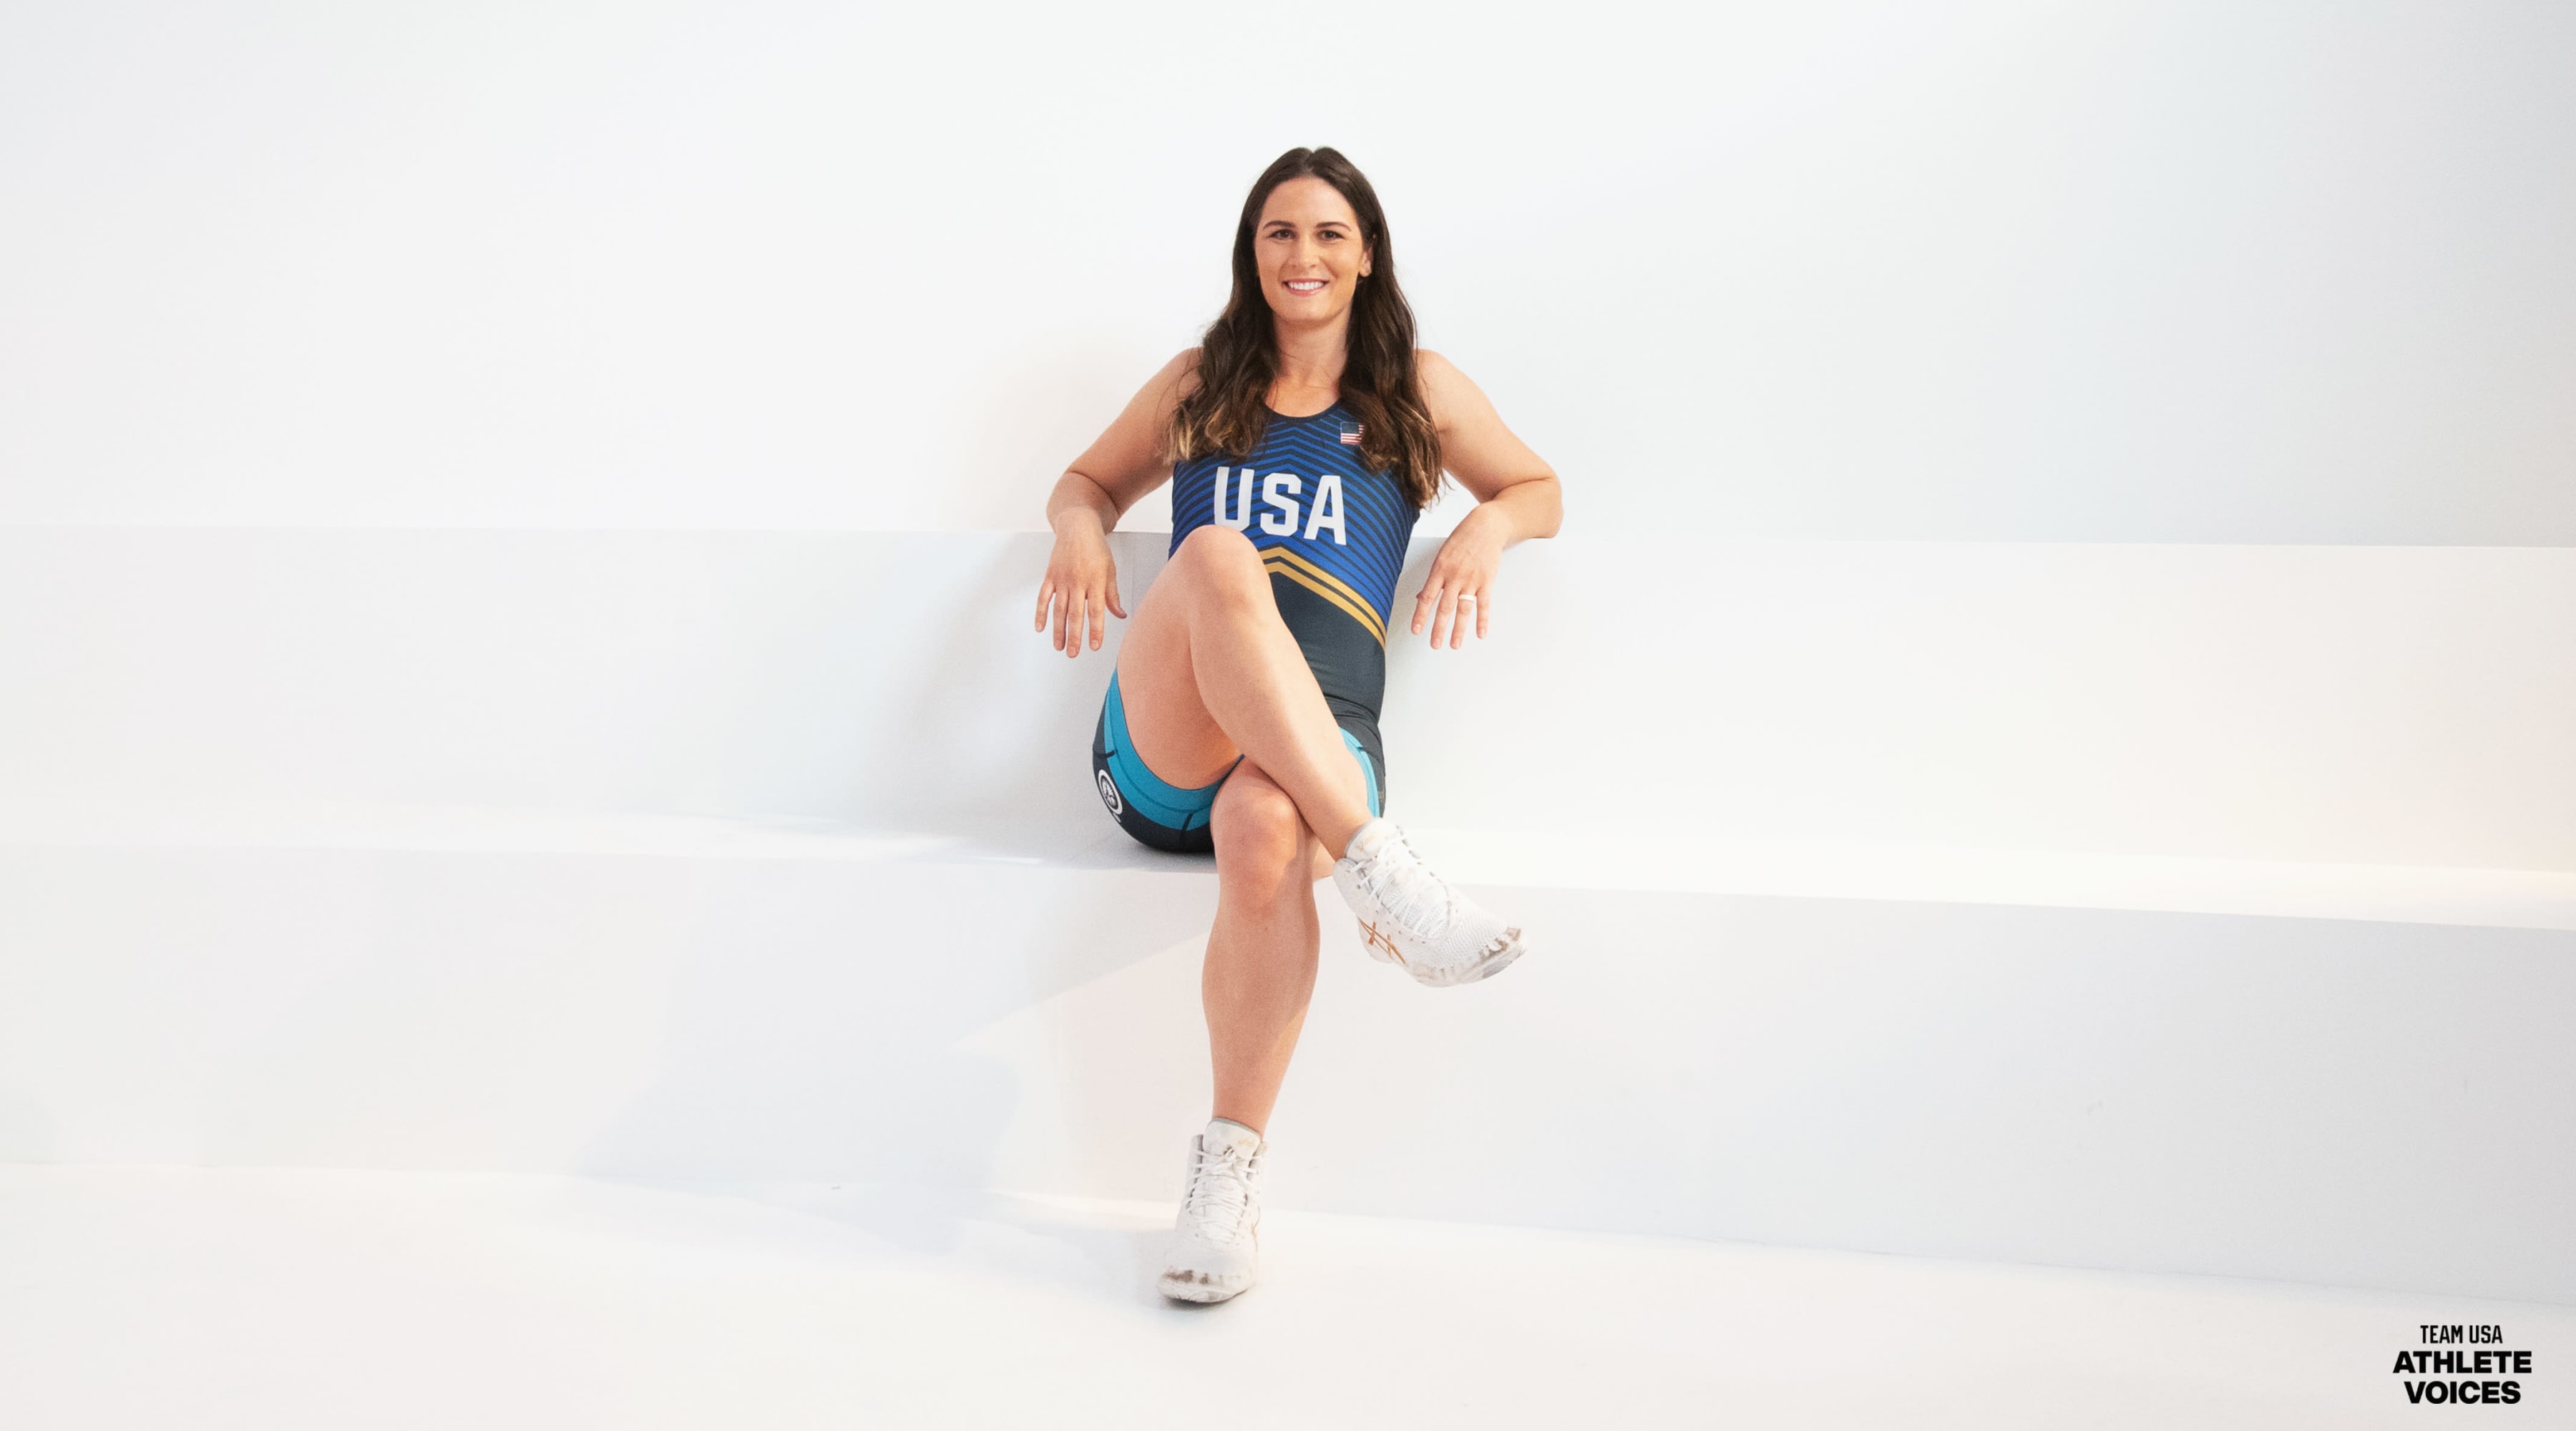 Adeline Gray poses on set at a shoot for Team USA in Los Angeles, California.